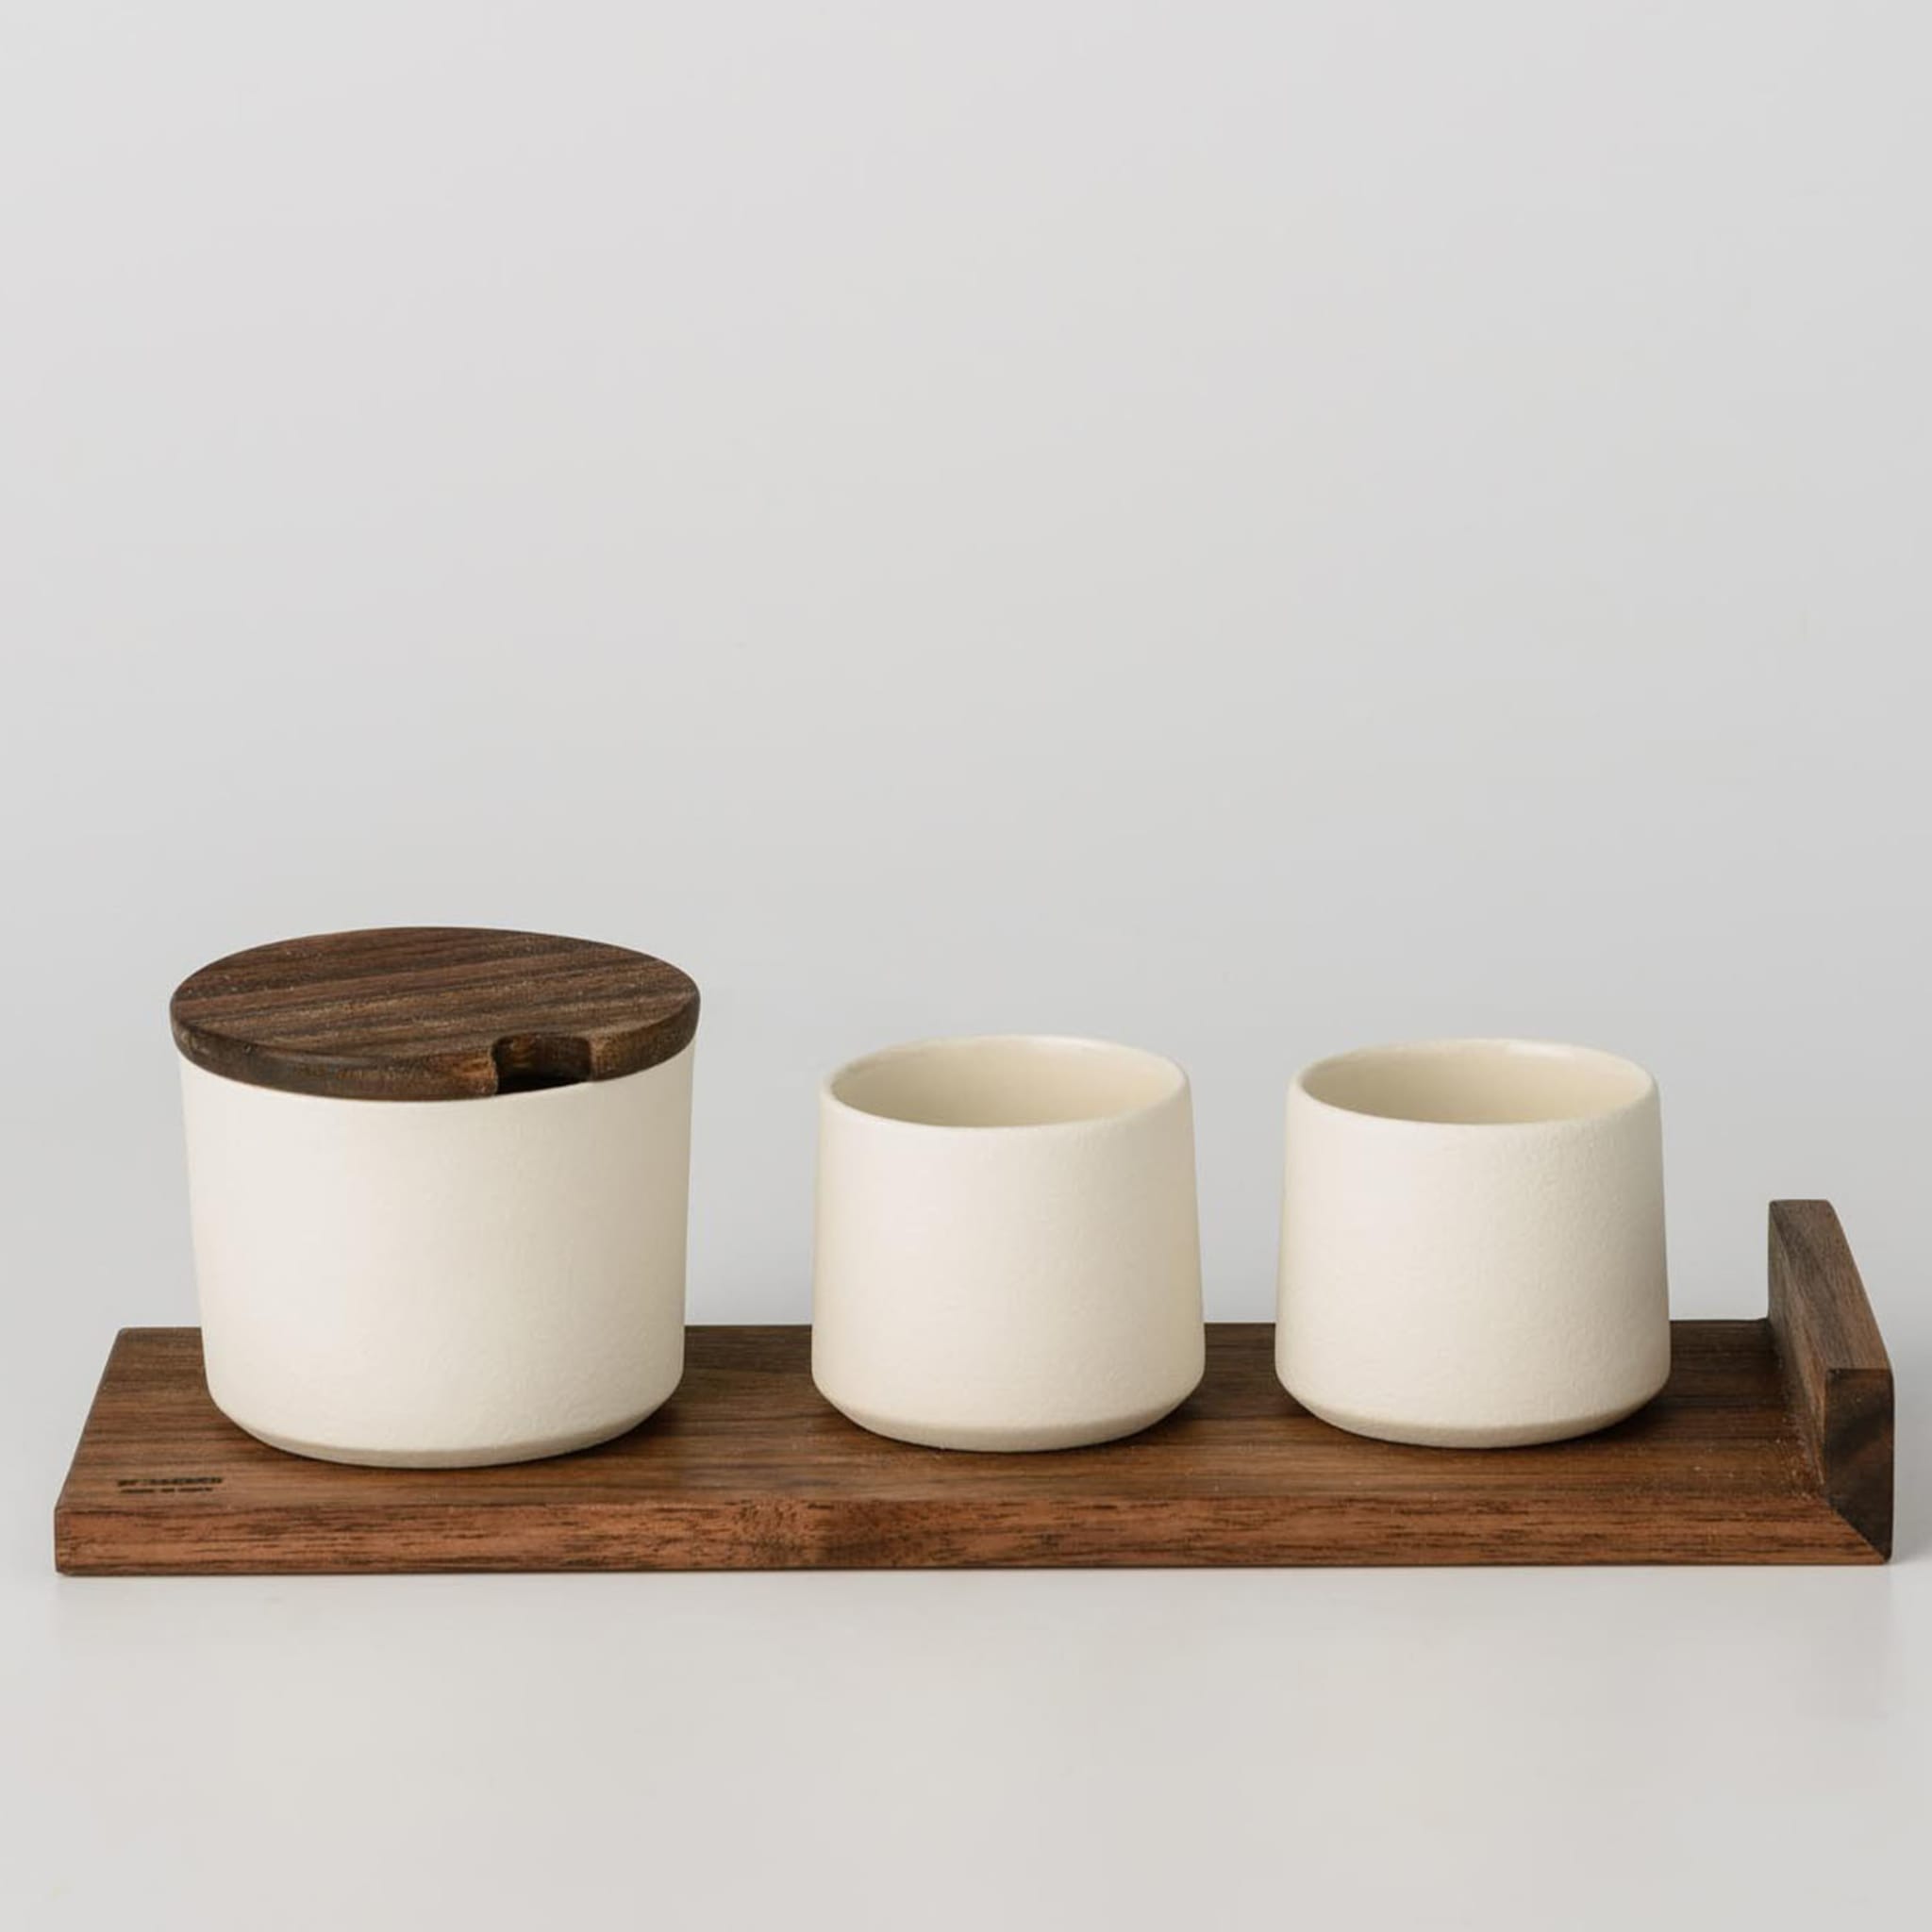 Two Sets of 2 Coffee Cups  - Alternative view 2